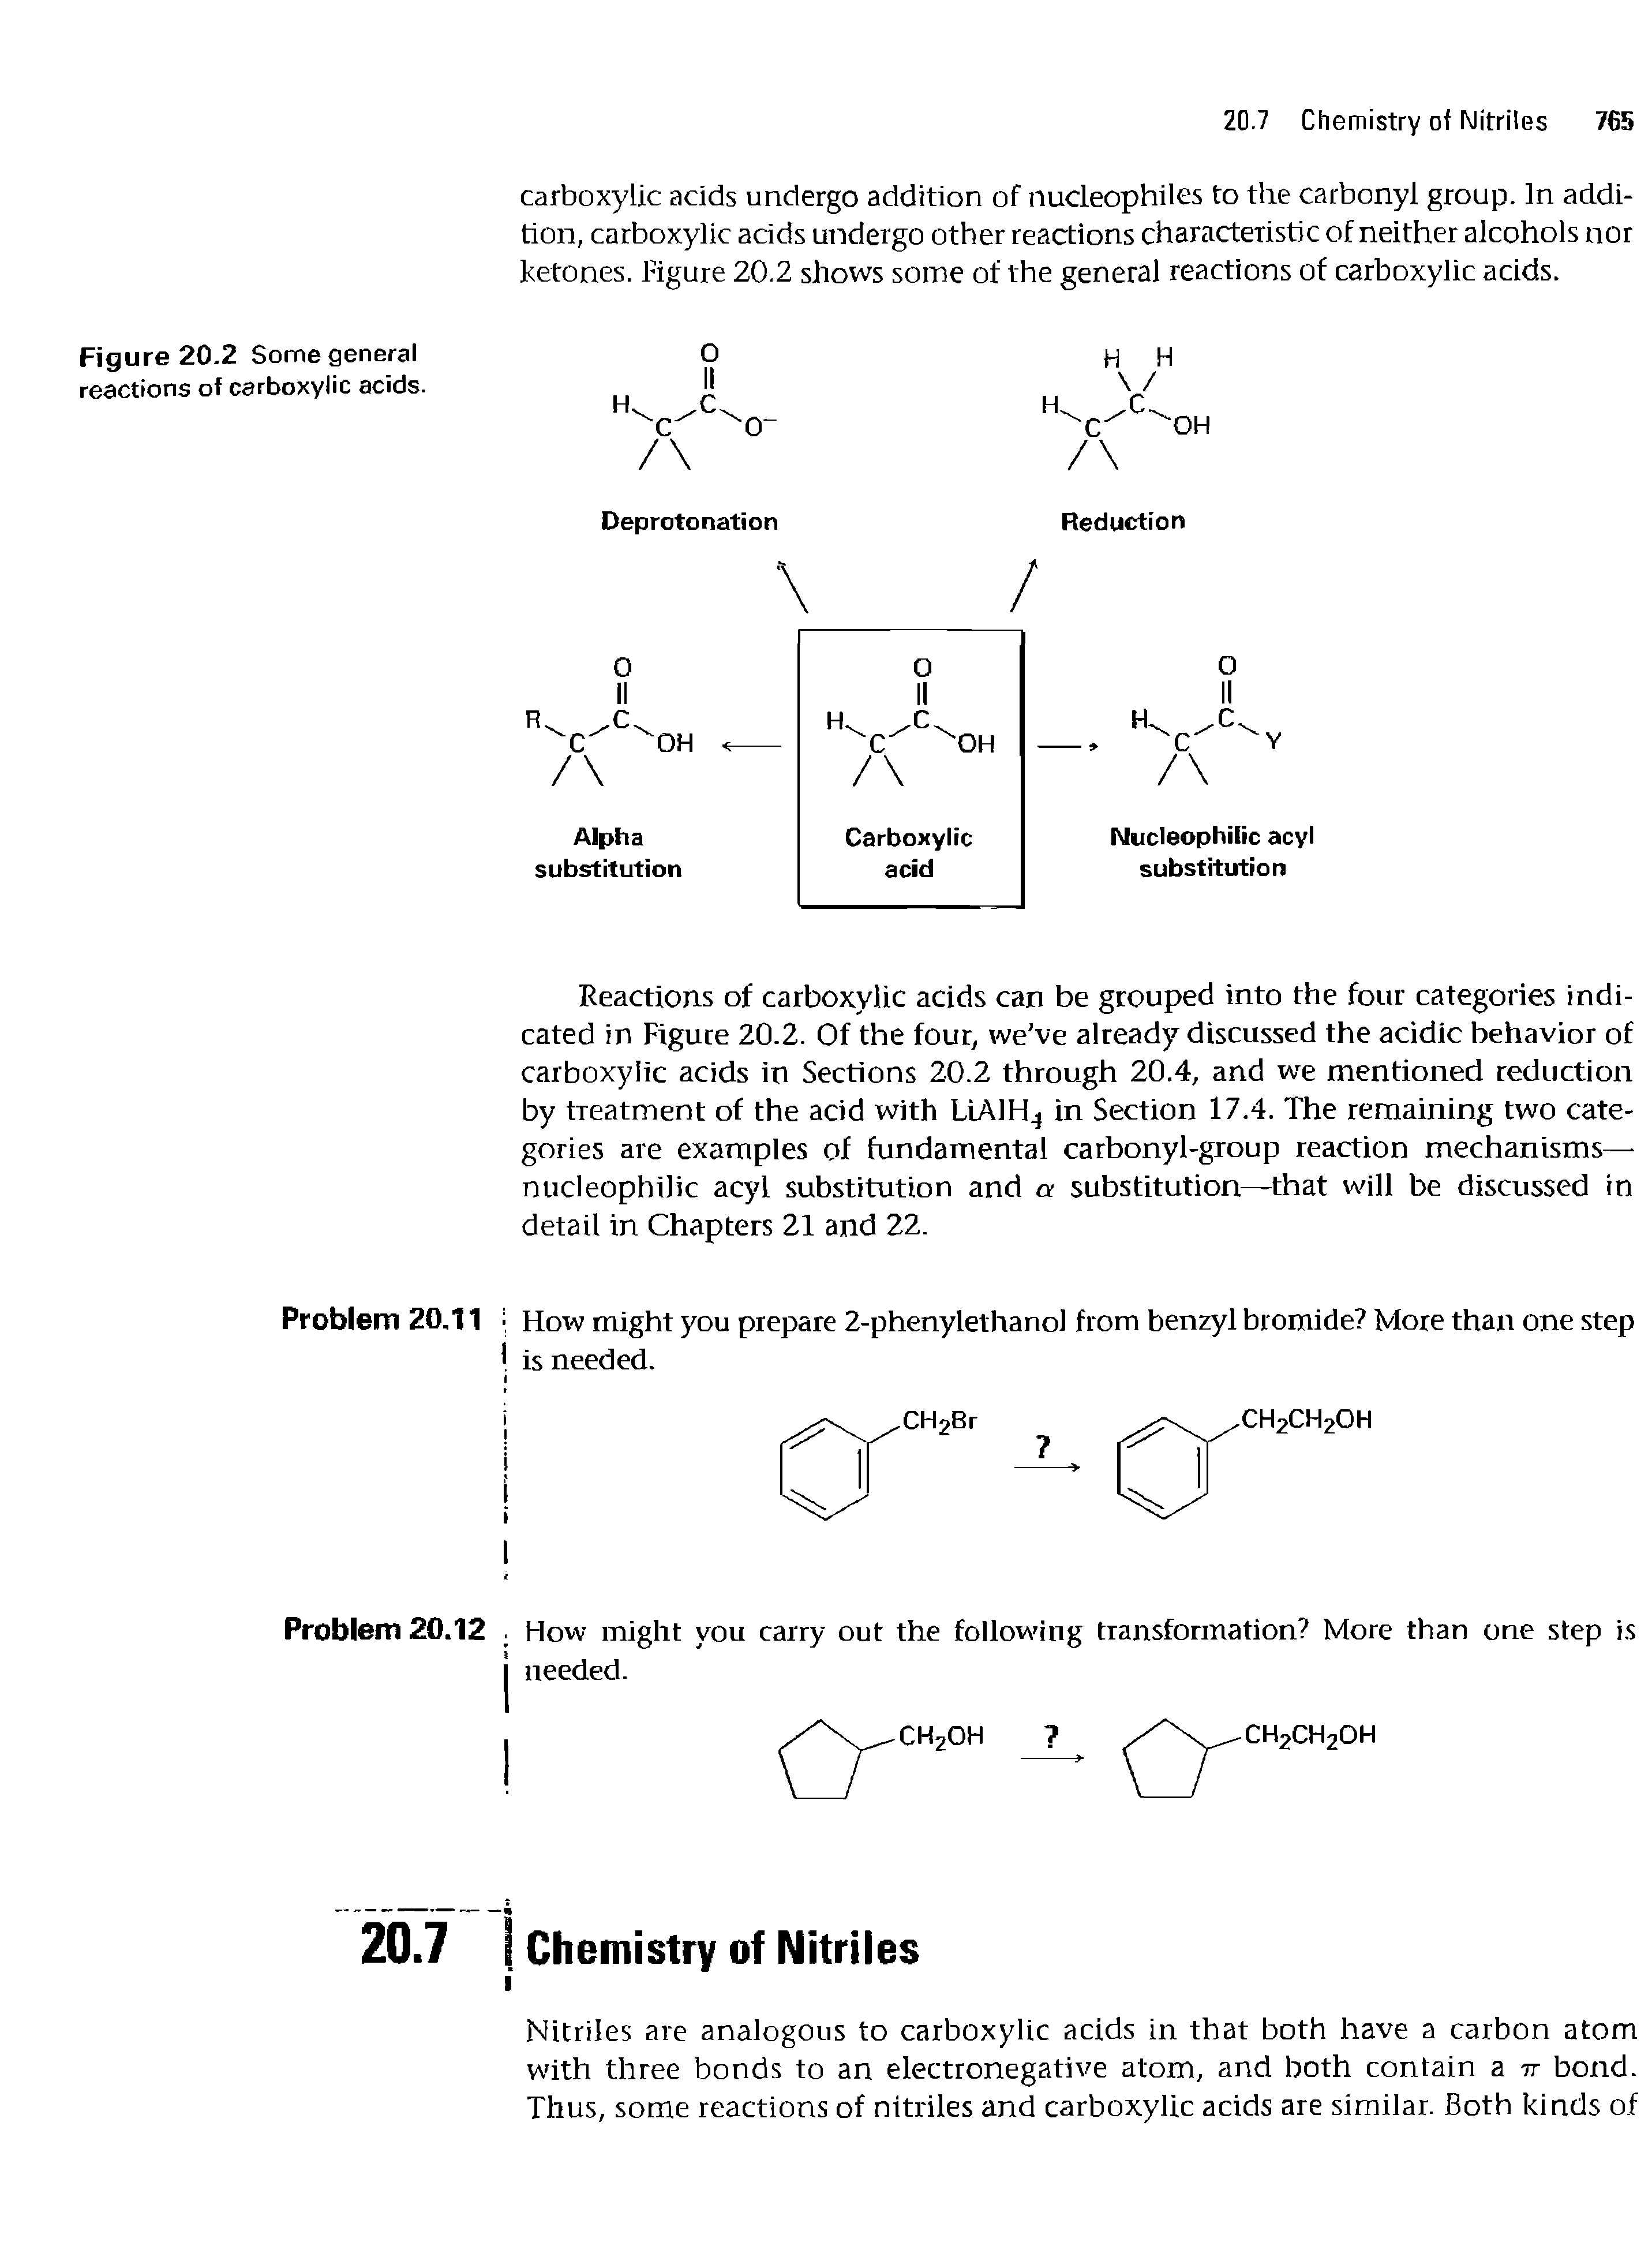 Figure 20.2 Some general reactions of carboxylic acids.